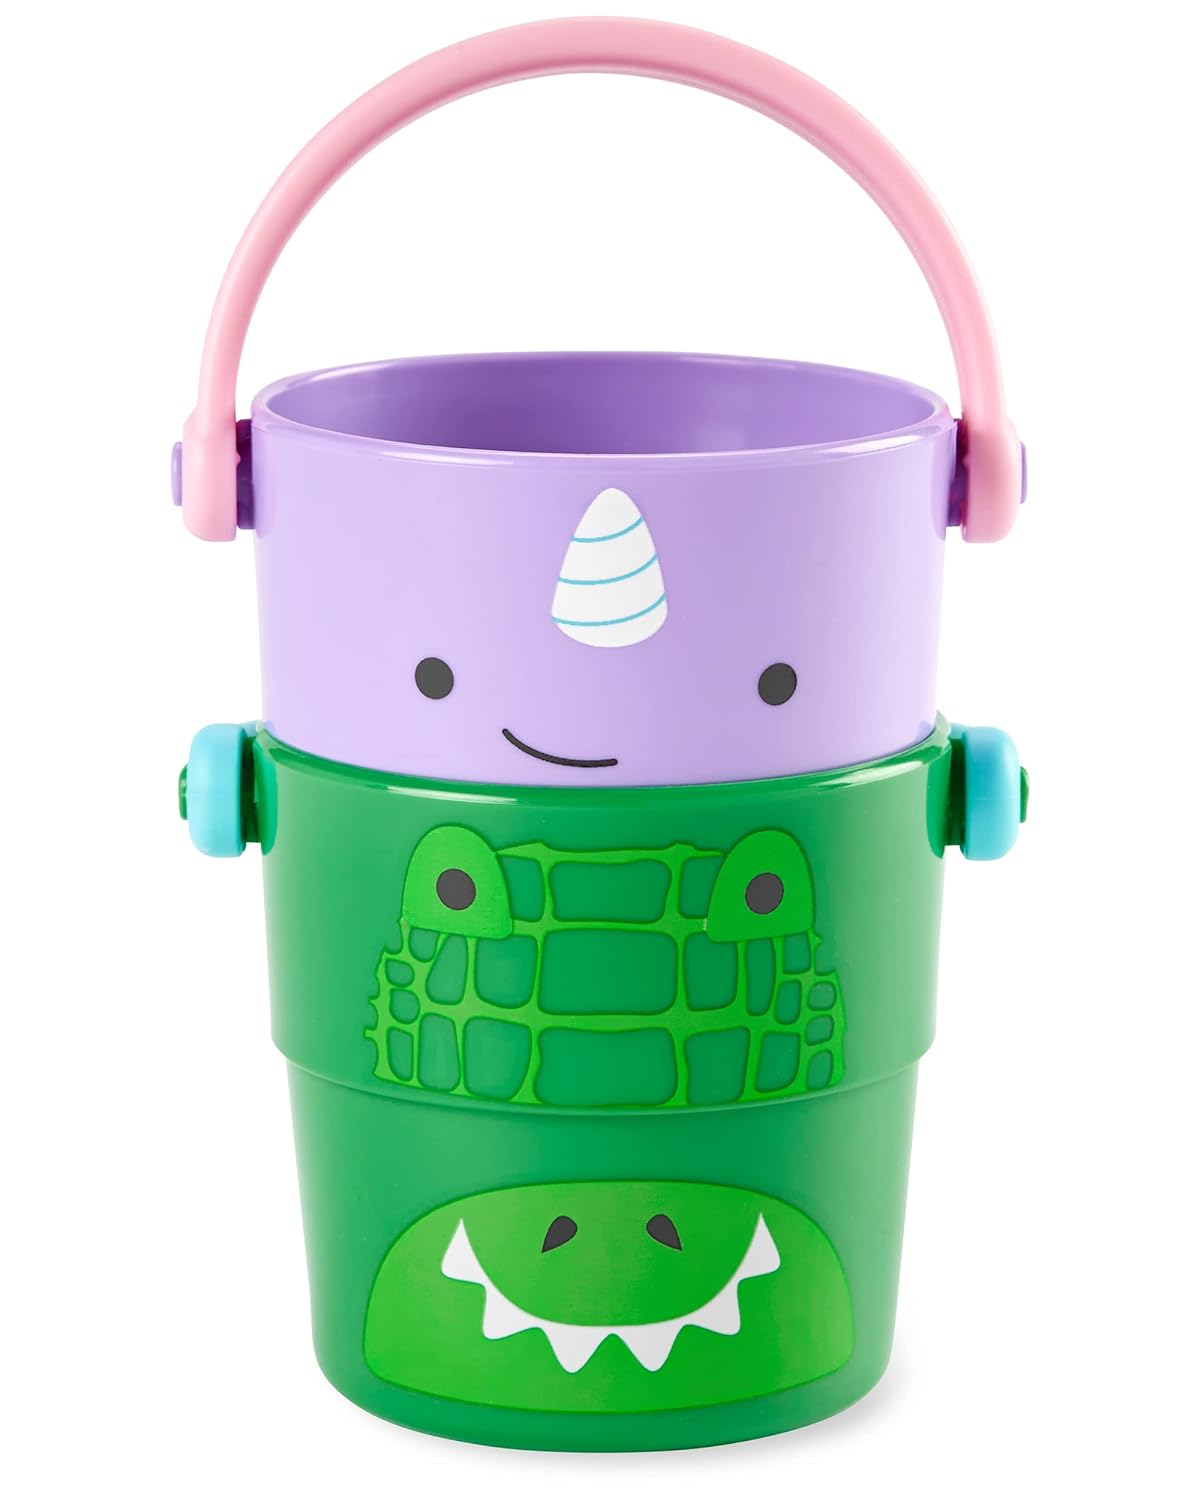 Skip Hop Baby Bath Toy Buckets, Zoo Stack & Pour Buckets, Pastel